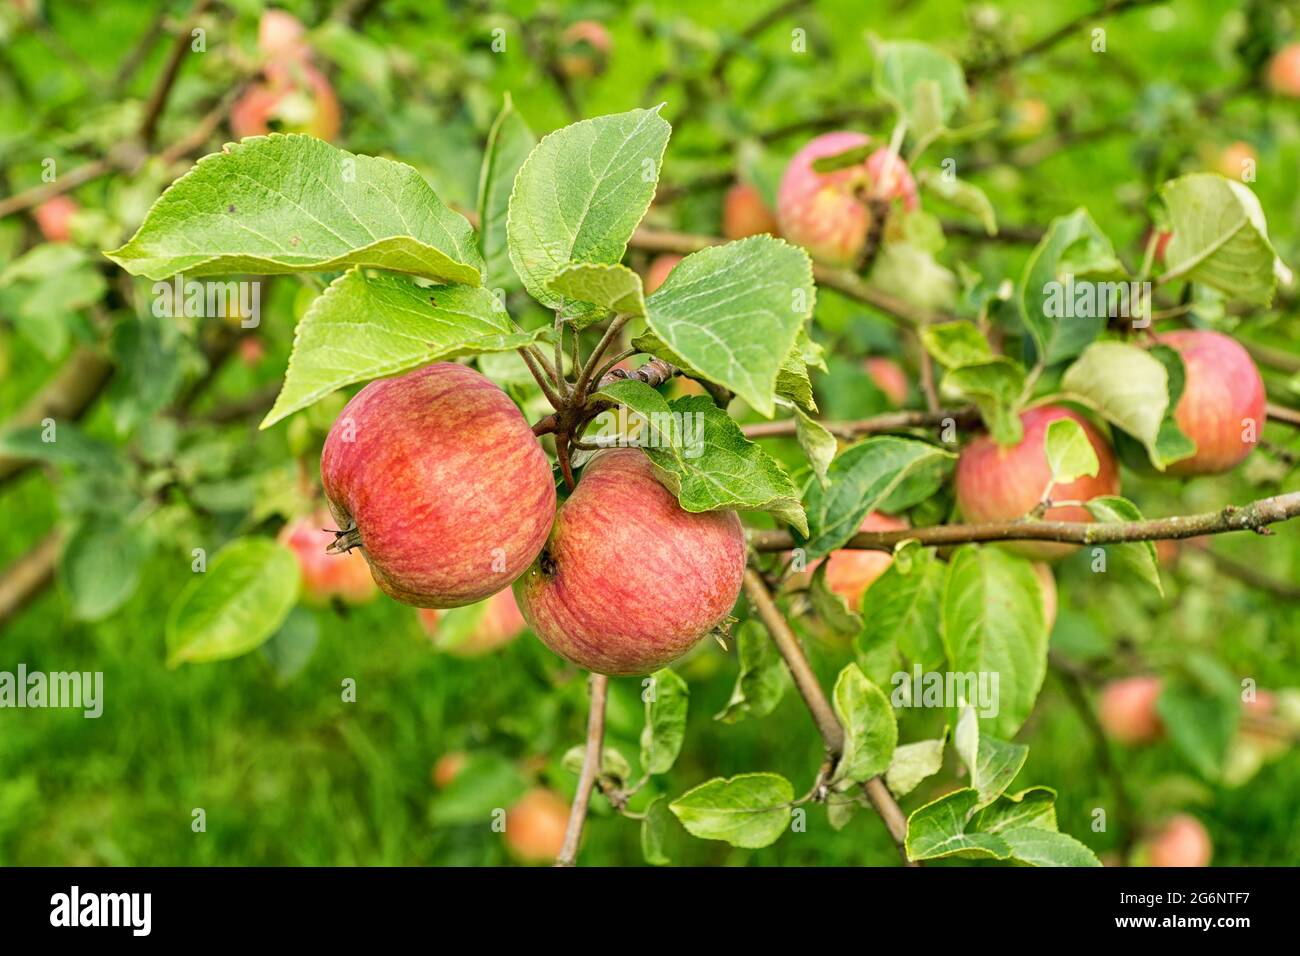 Ripe red apples on a branch of apple tree on a sunny day. Organic farming/agriculture; fresh, healthy, natural, unprocessed produce. Stock Photo